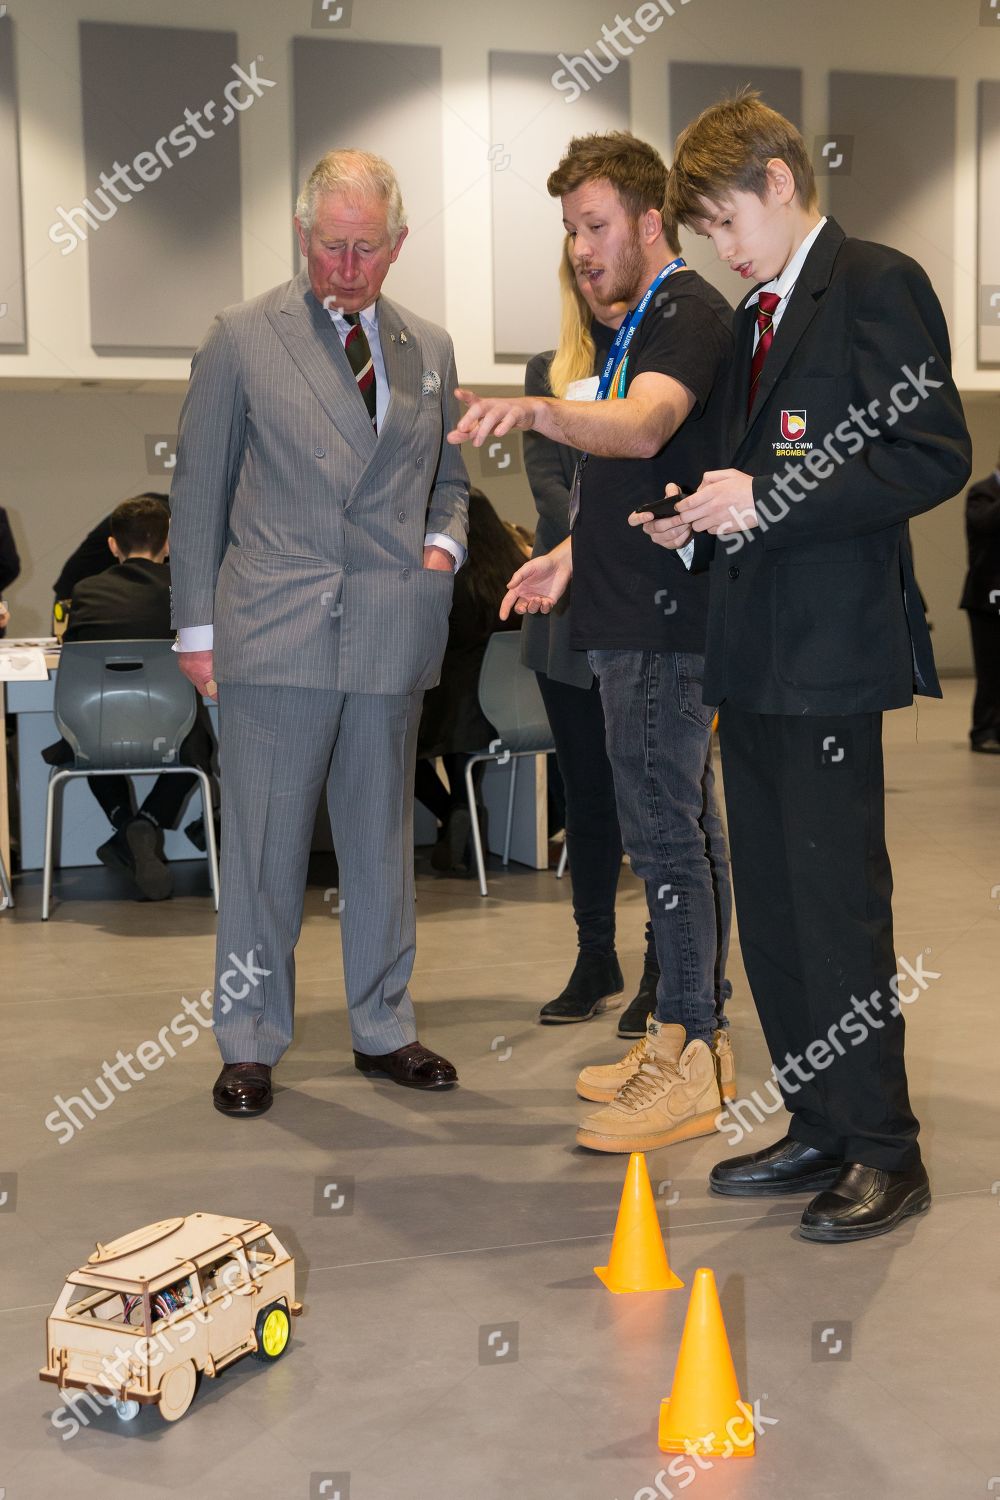 prince-charles-visit-to-wales-uk-shutterstock-editorial-10115952a.jpg